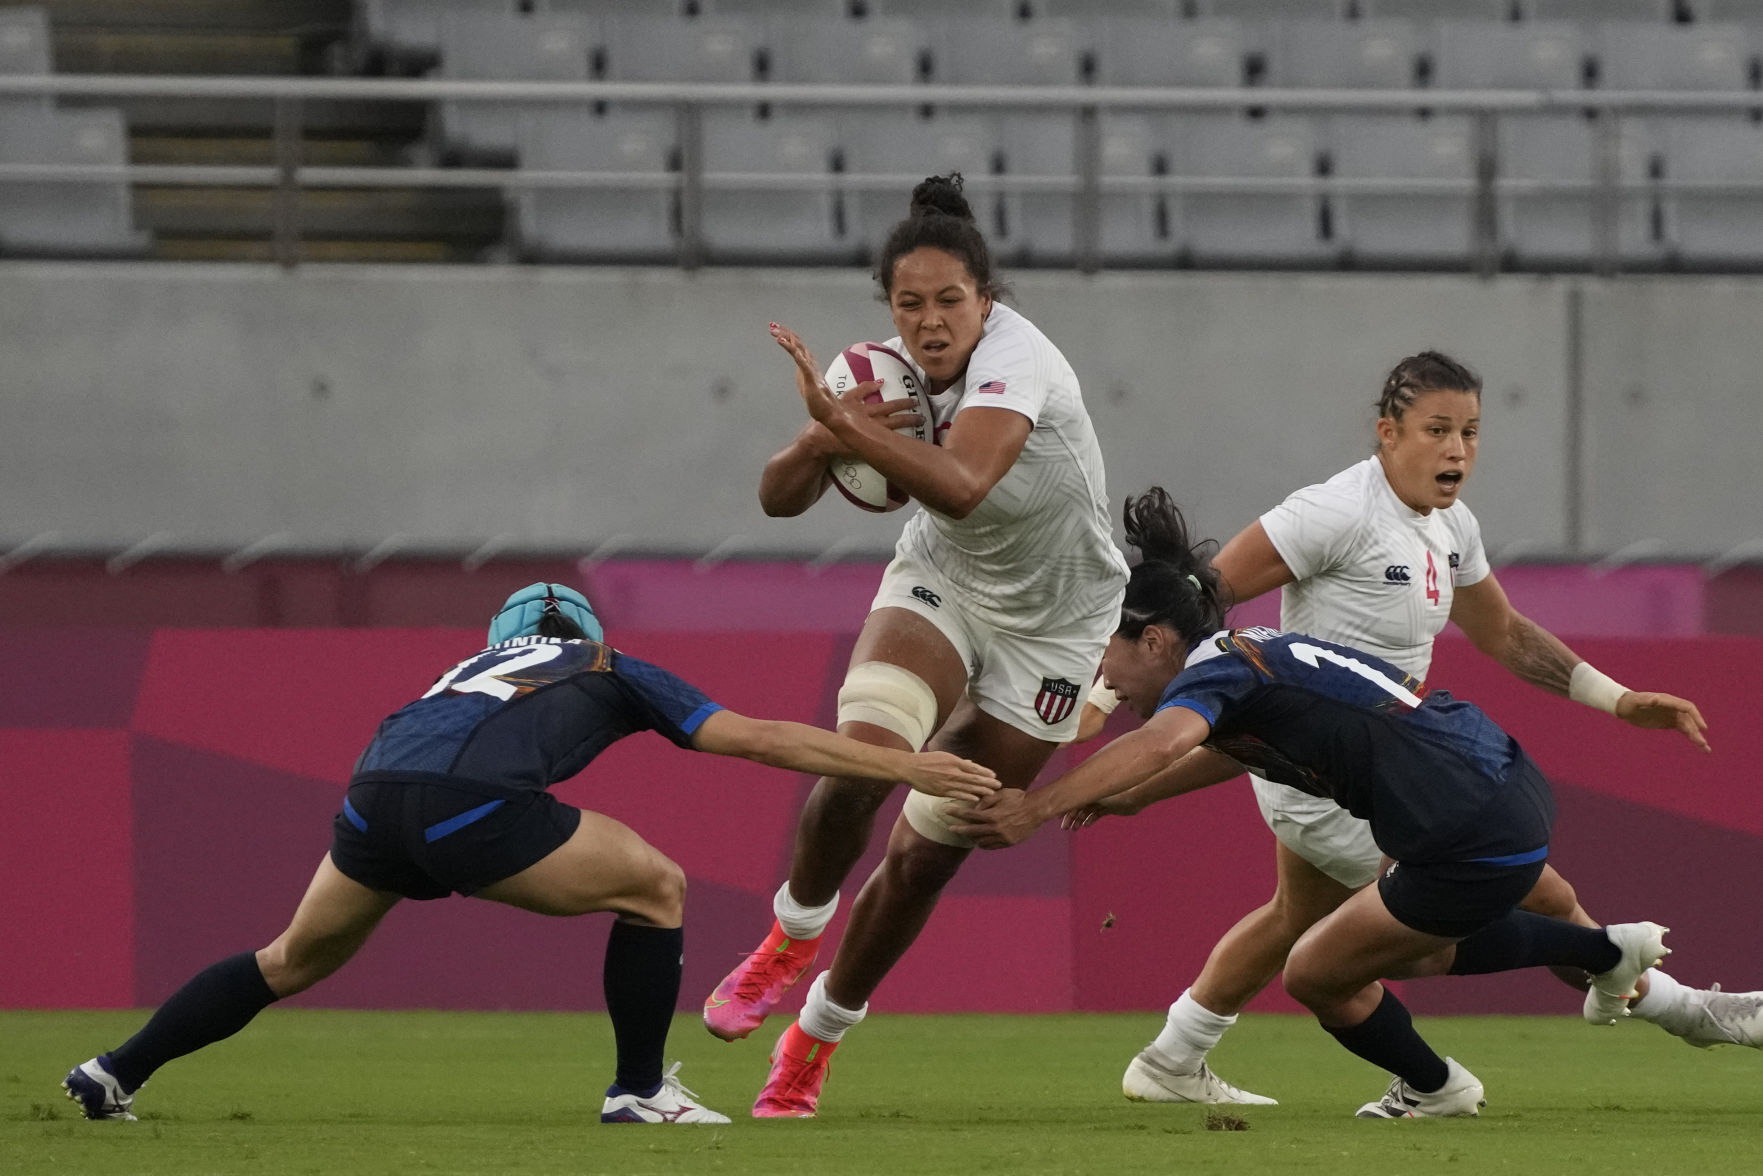 Team USA and Whitefishs Nicole Heavirland clinch place in Olympic rugby sevens quarterfinals